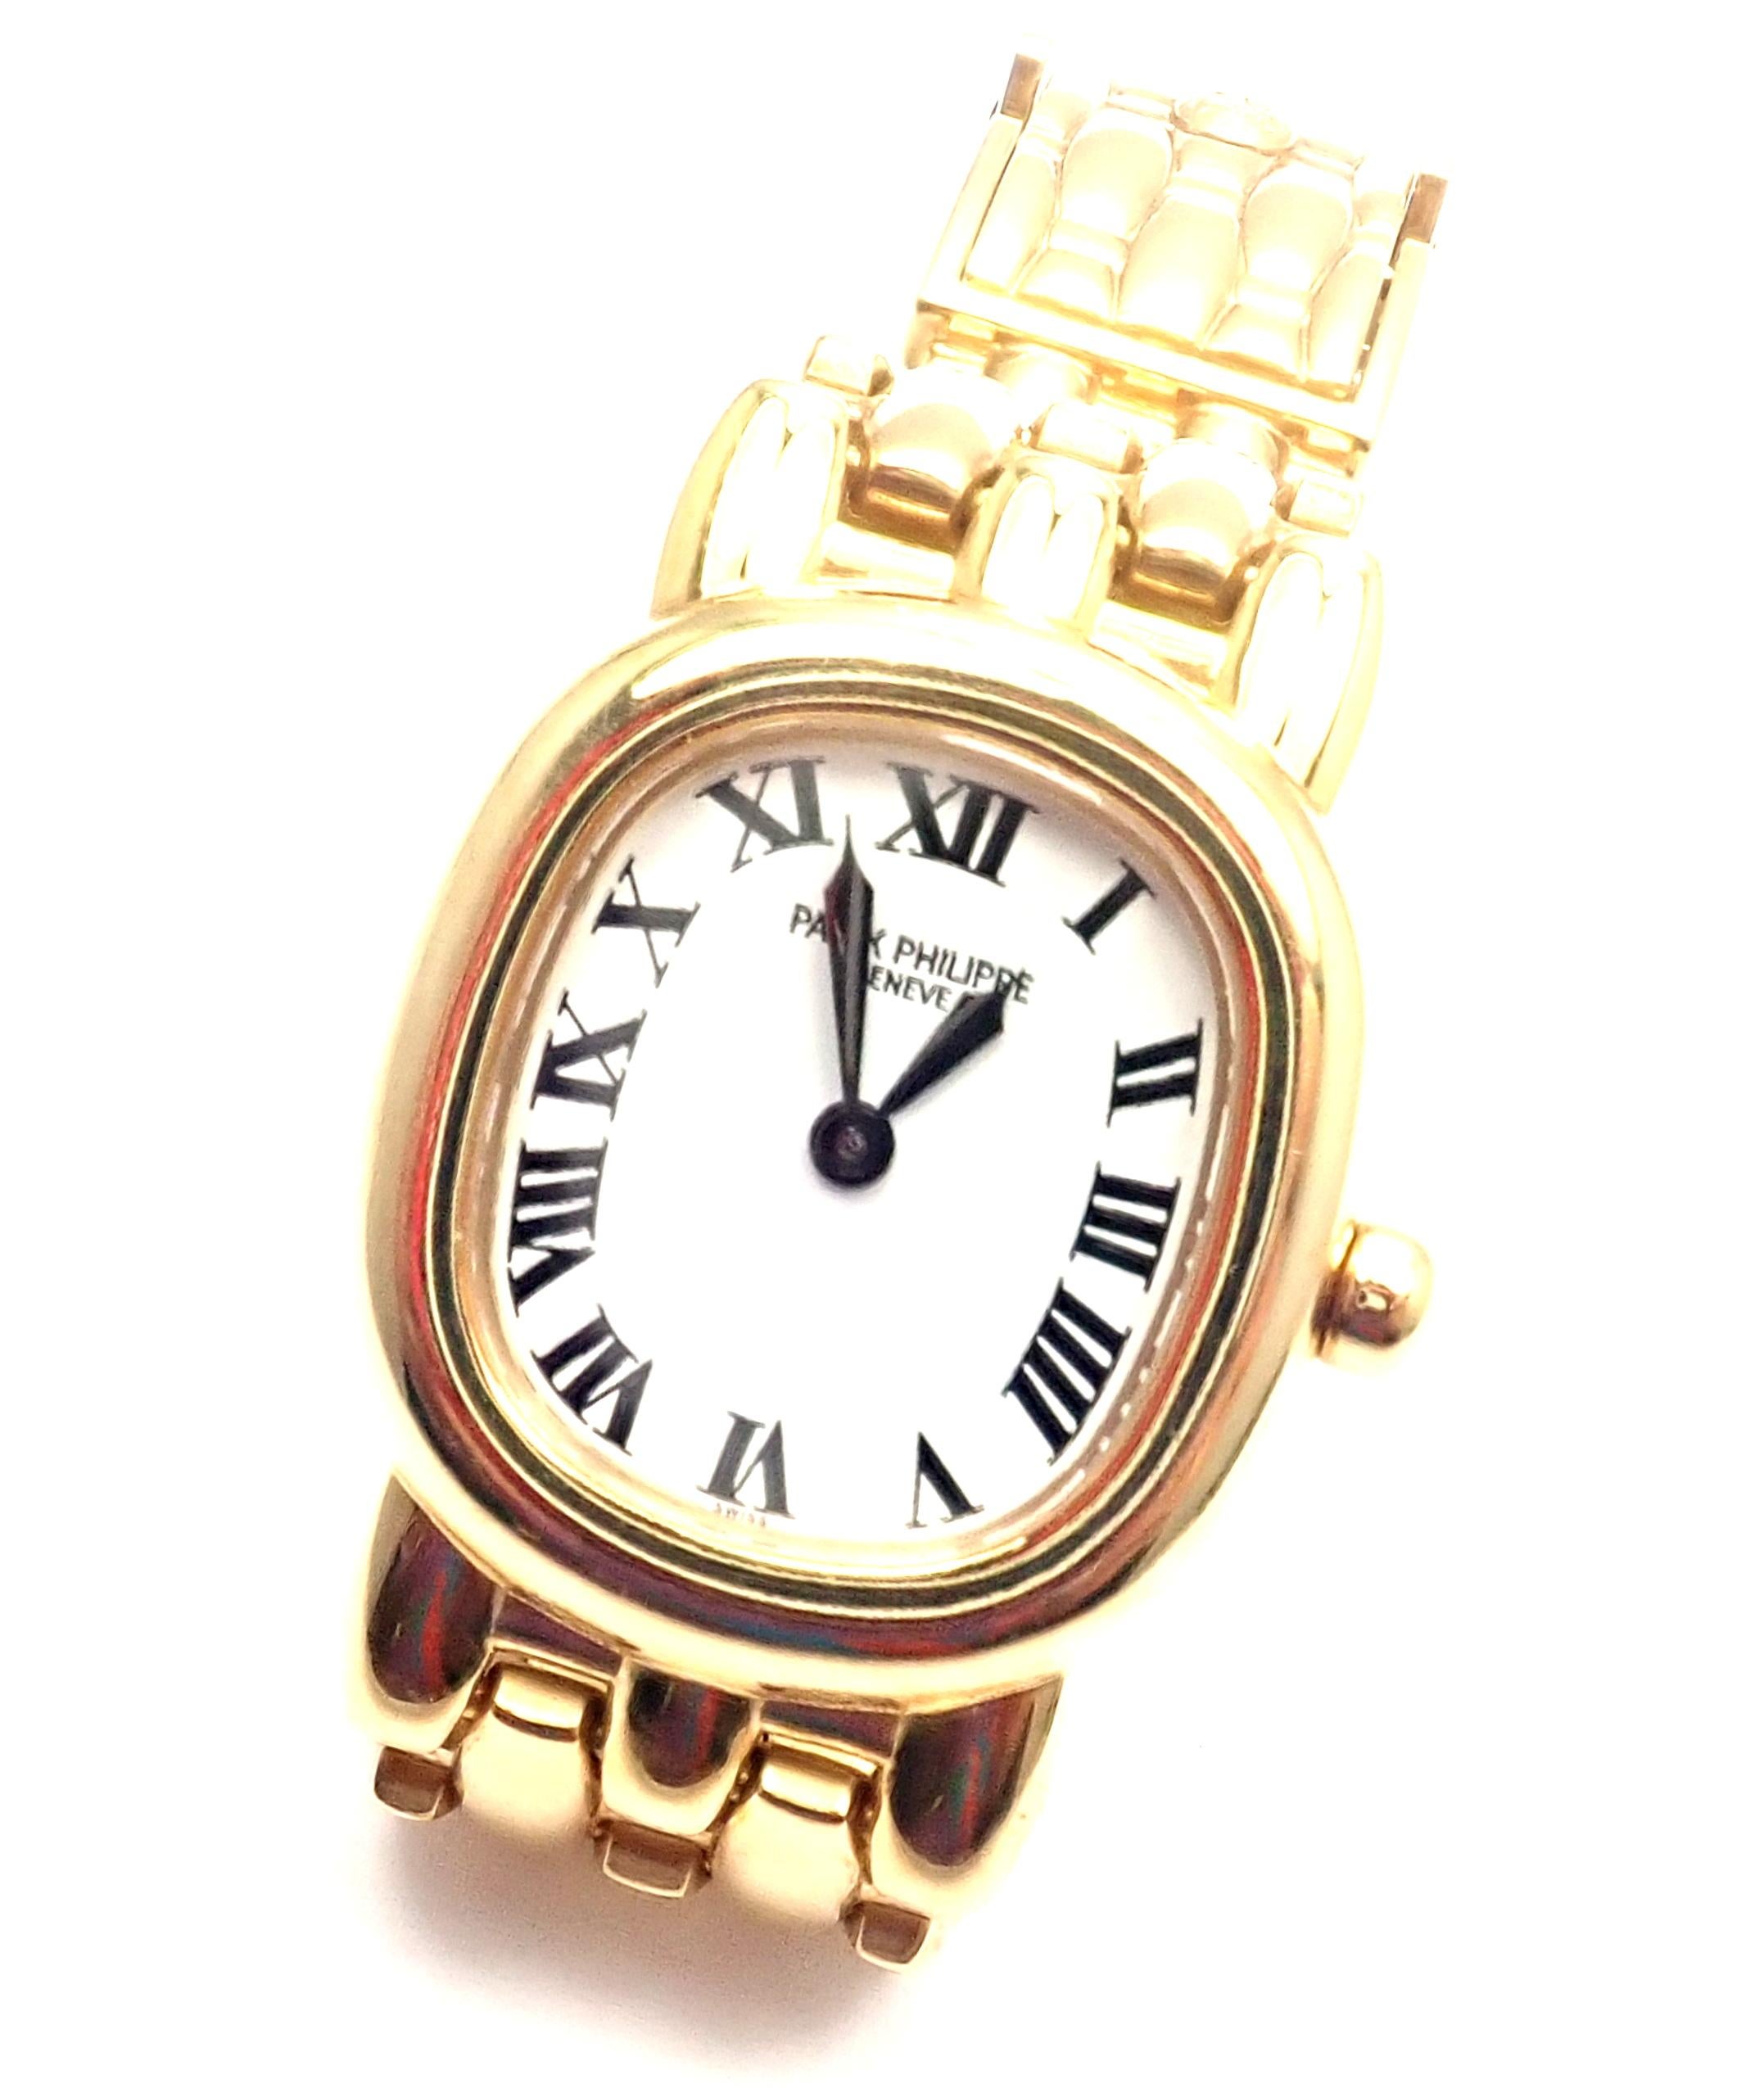 18k yellow gold Ellipse wristwatch by Patek Philippe, Ref 4830/1.
 This watch is in mint, like-new condition. 
Comes with box and tags from Patek Philippe. 
Details: 
Movement: Quartz function hours/minutes
Case Size: 26 x 23mm
Case Material: 18k